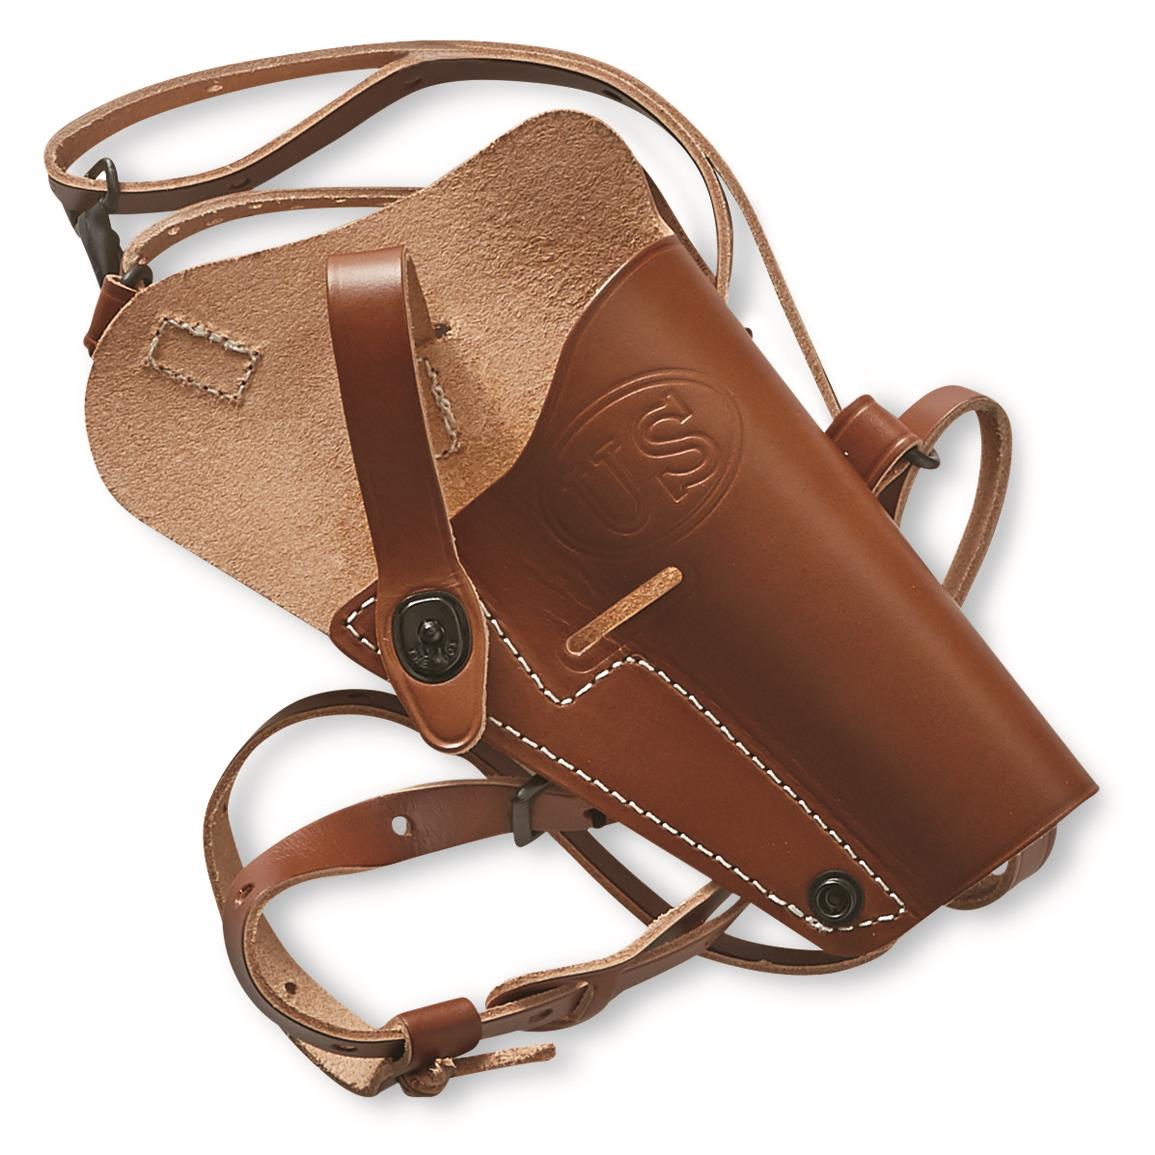 Hunter Crossdraw Leather Holster - Fits medium to large frame double-action  revolvers - 82304, Universal/Multi-Fit Holsters at Sportsman's Guide